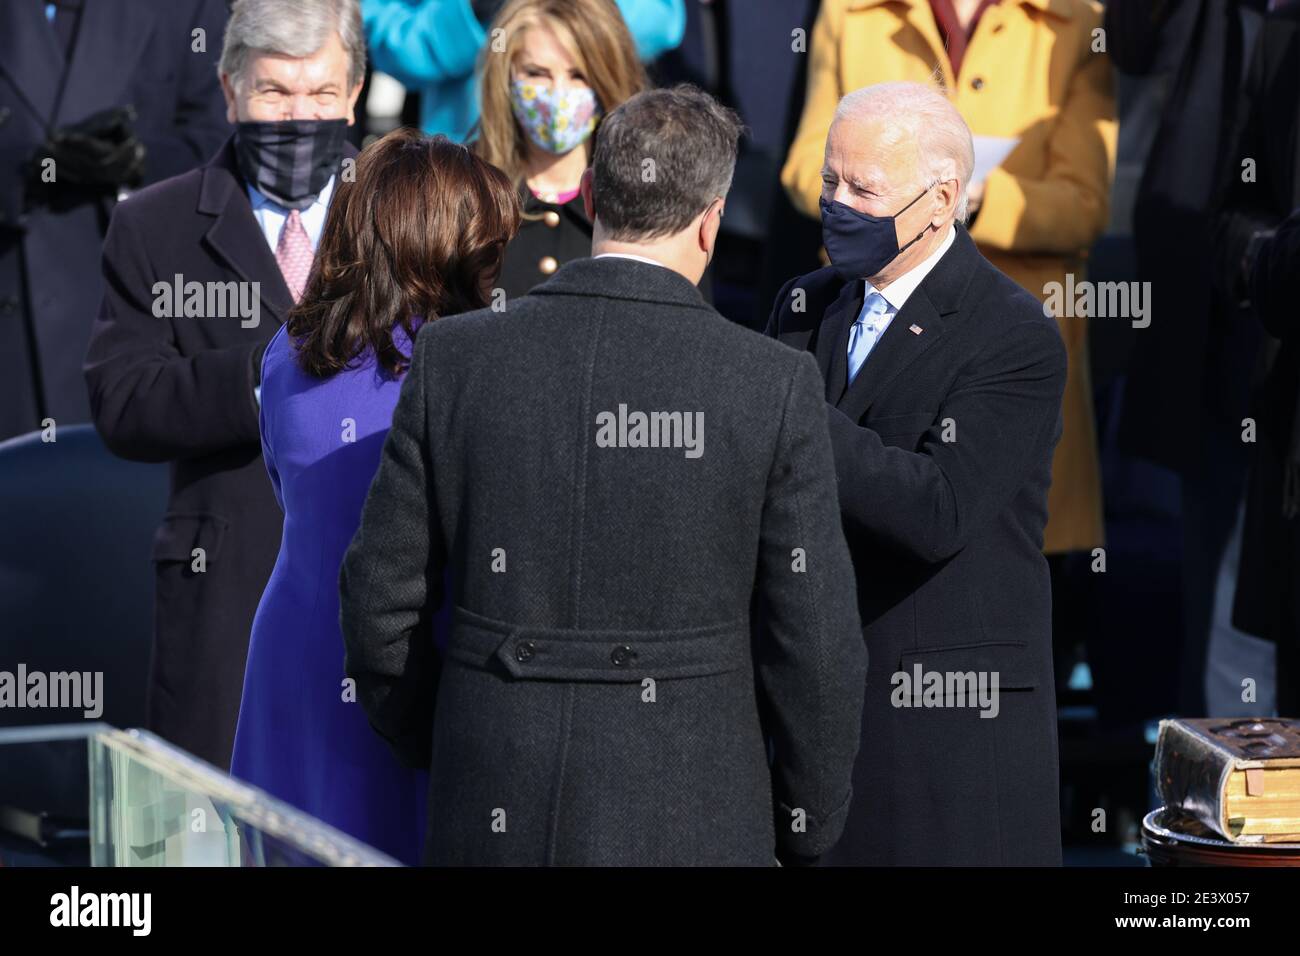 Washington, USA. 20th Jan, 2021.Doug Emhoff and Vice President-elect Kamala Harris are congratulated by President-elect Joe Biden during the Inauguration Day ceremony of President-Elect Joe Biden and Vice President-Elect Kamala Harris held at the U.S. Capitol Building in Washington, D.C. on Jan. 20, 2021. President-elect Joe Biden becomes the 46th President of the United States at noon on Inauguration Day. (Photo by Oliver Contreras/Sipa USA) Stock Photo